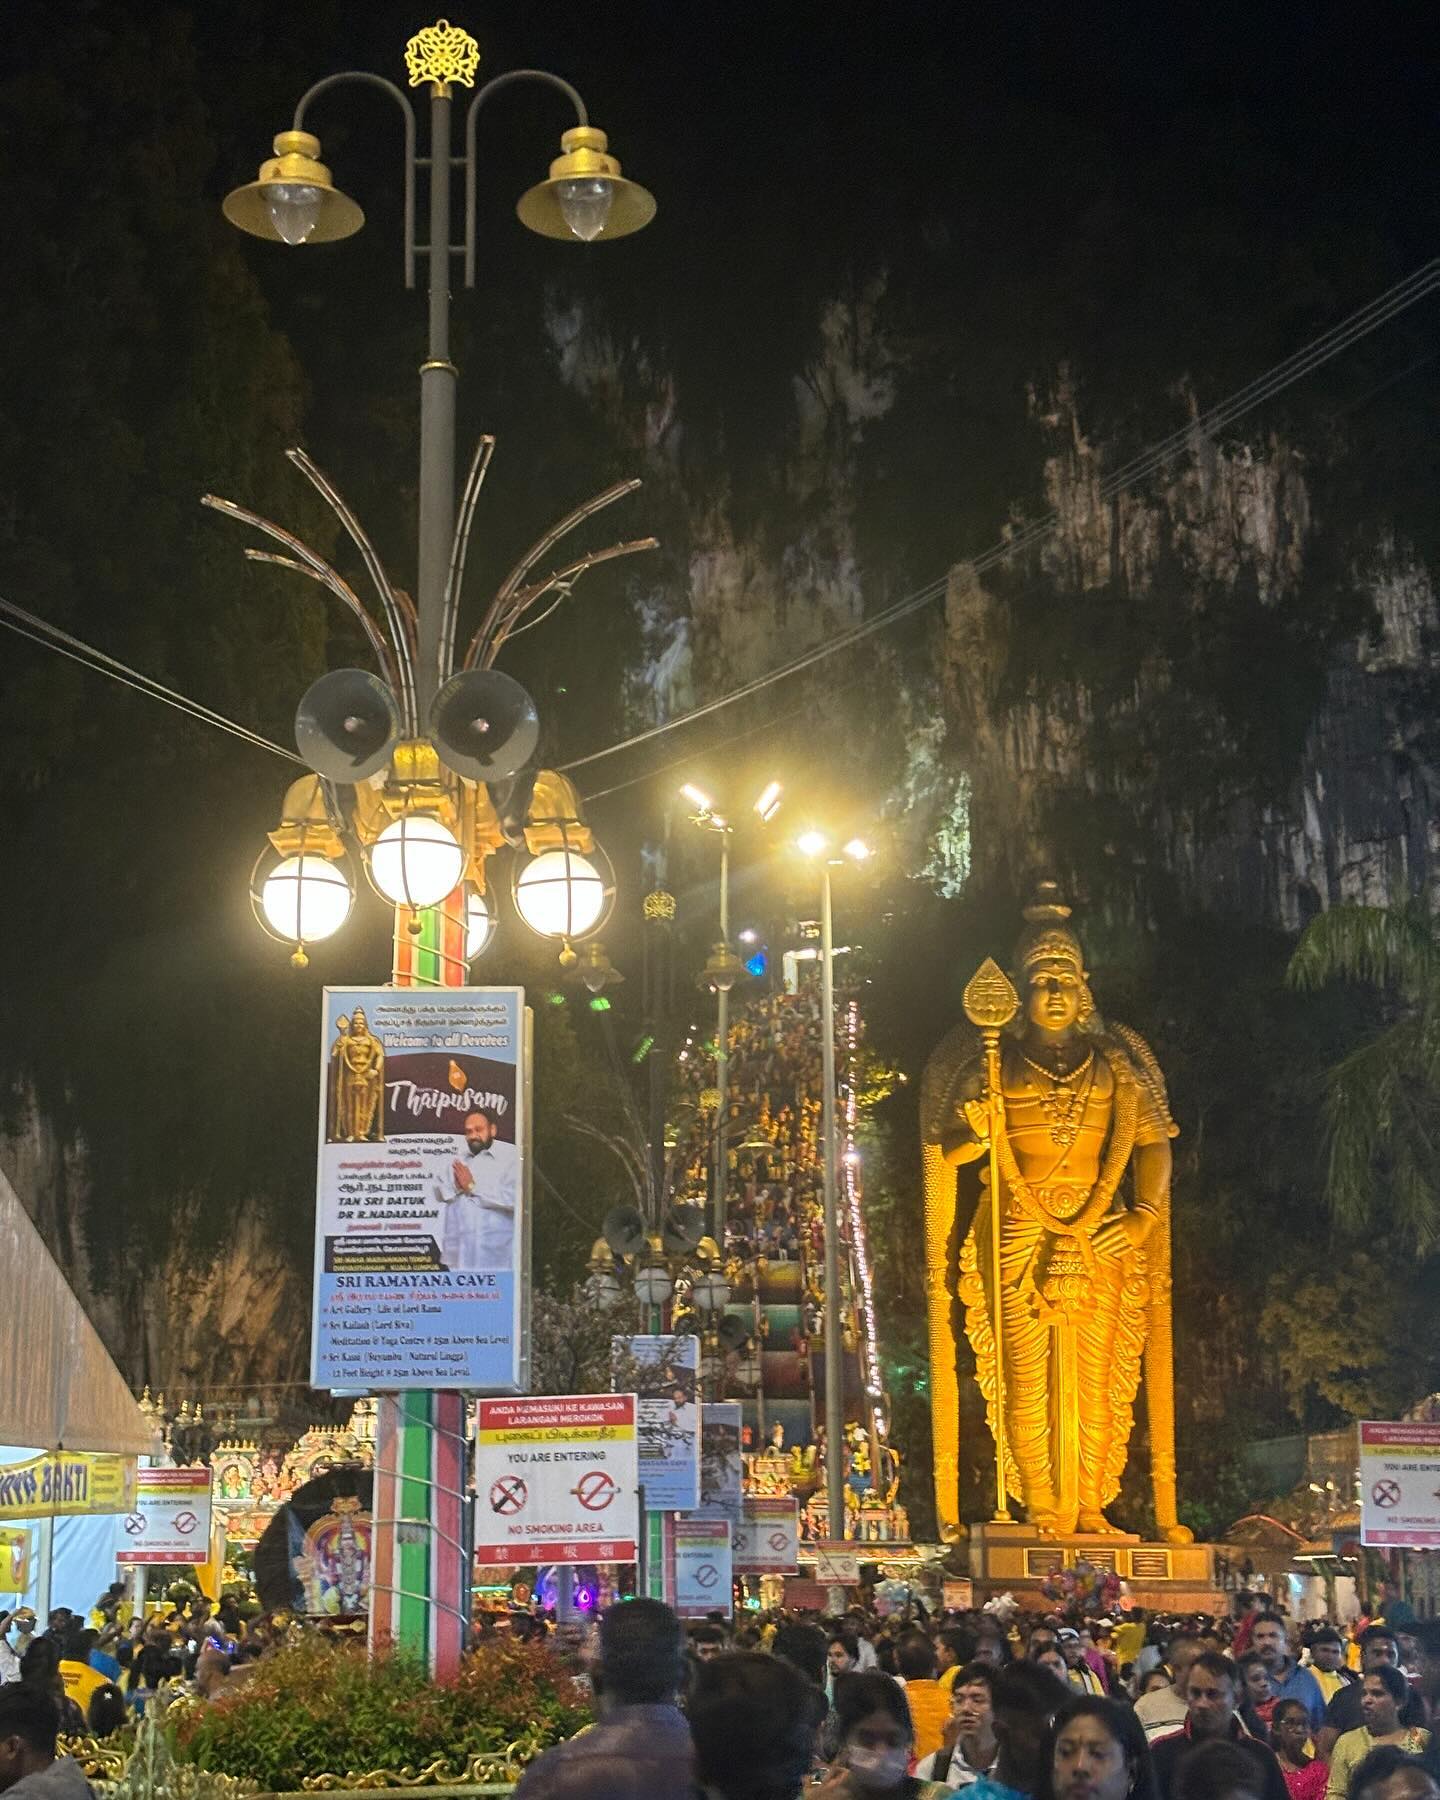 More than a festival, Thaipusam is a testament to the human spirit. Witnessing thousands united in faith, pushing past limits, and painting the Batu Caves with unwavering devotion. This is Malaysia, this is Thaipusam! #ThaipusamStrength #MalaysiaBoleh #BatuCavesWonder #DiversityCelebrated #SoulfulJourney